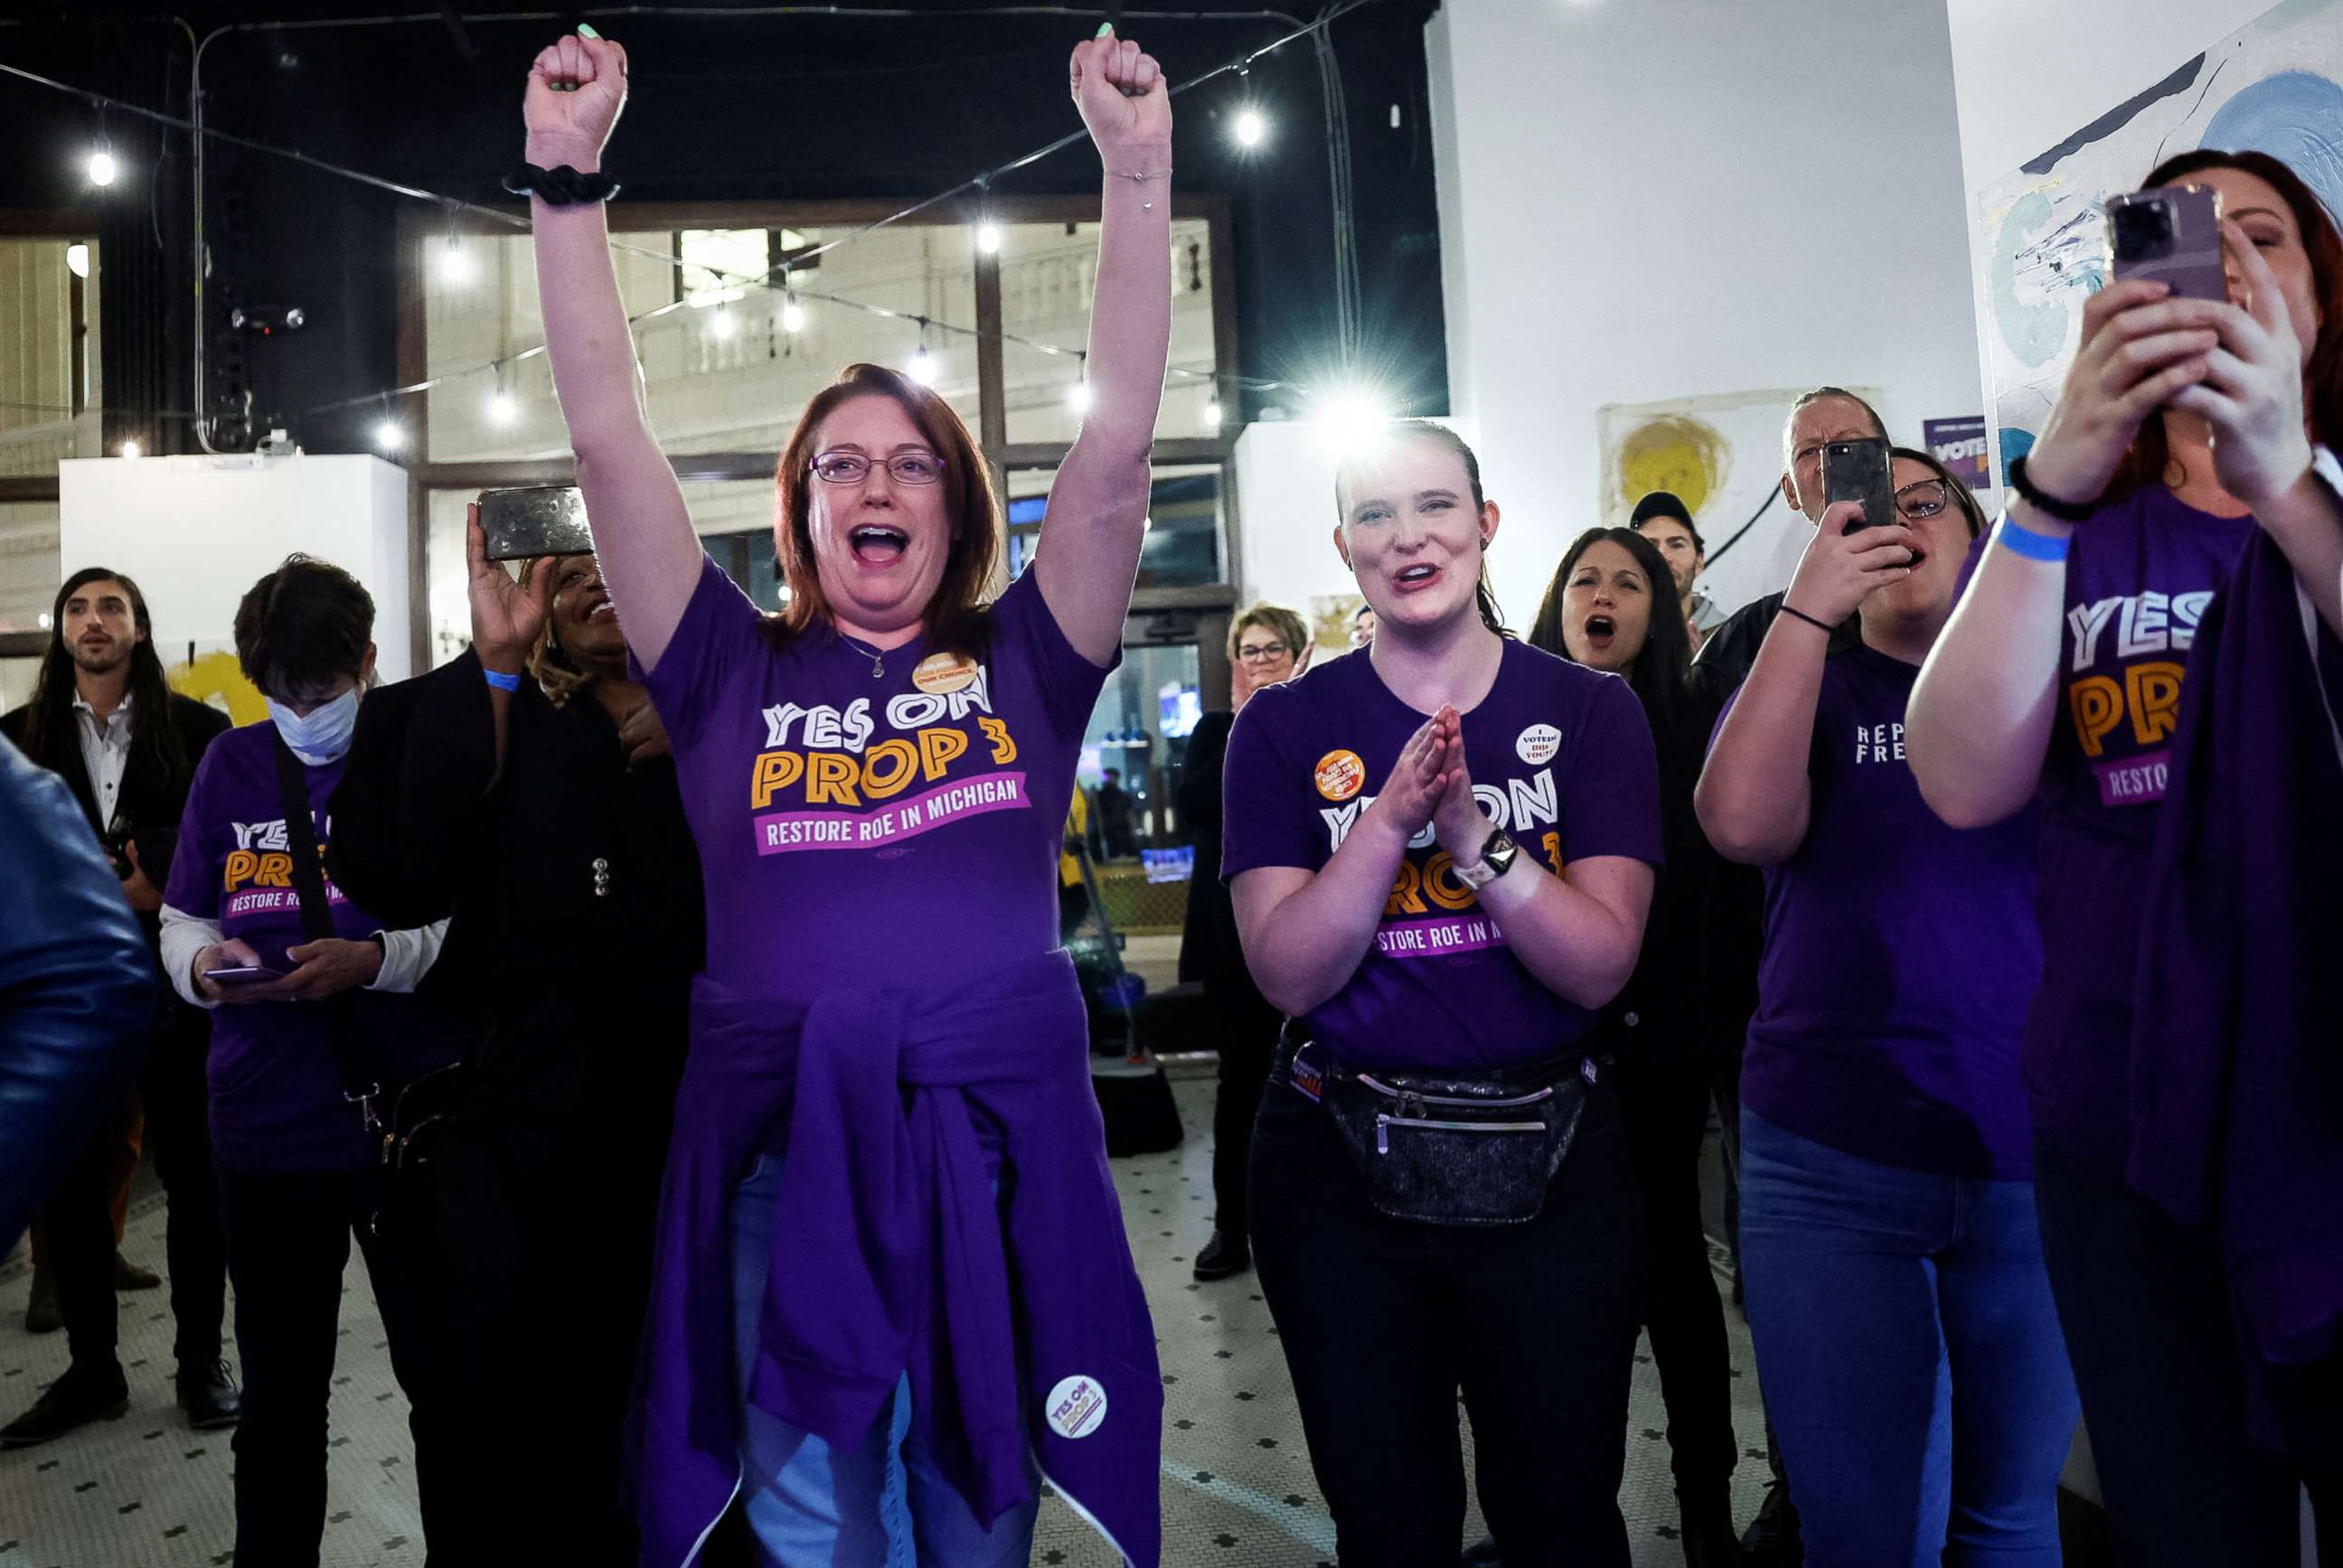 PHOTO: Women cheer as they hear early voting results indicating the passage of Proposition 3, a midterm ballot measure that enshrines abortion rights, during a Reproductive Freedom For All watch party on election night in Detroit, Mich., Nov. 8, 2022.